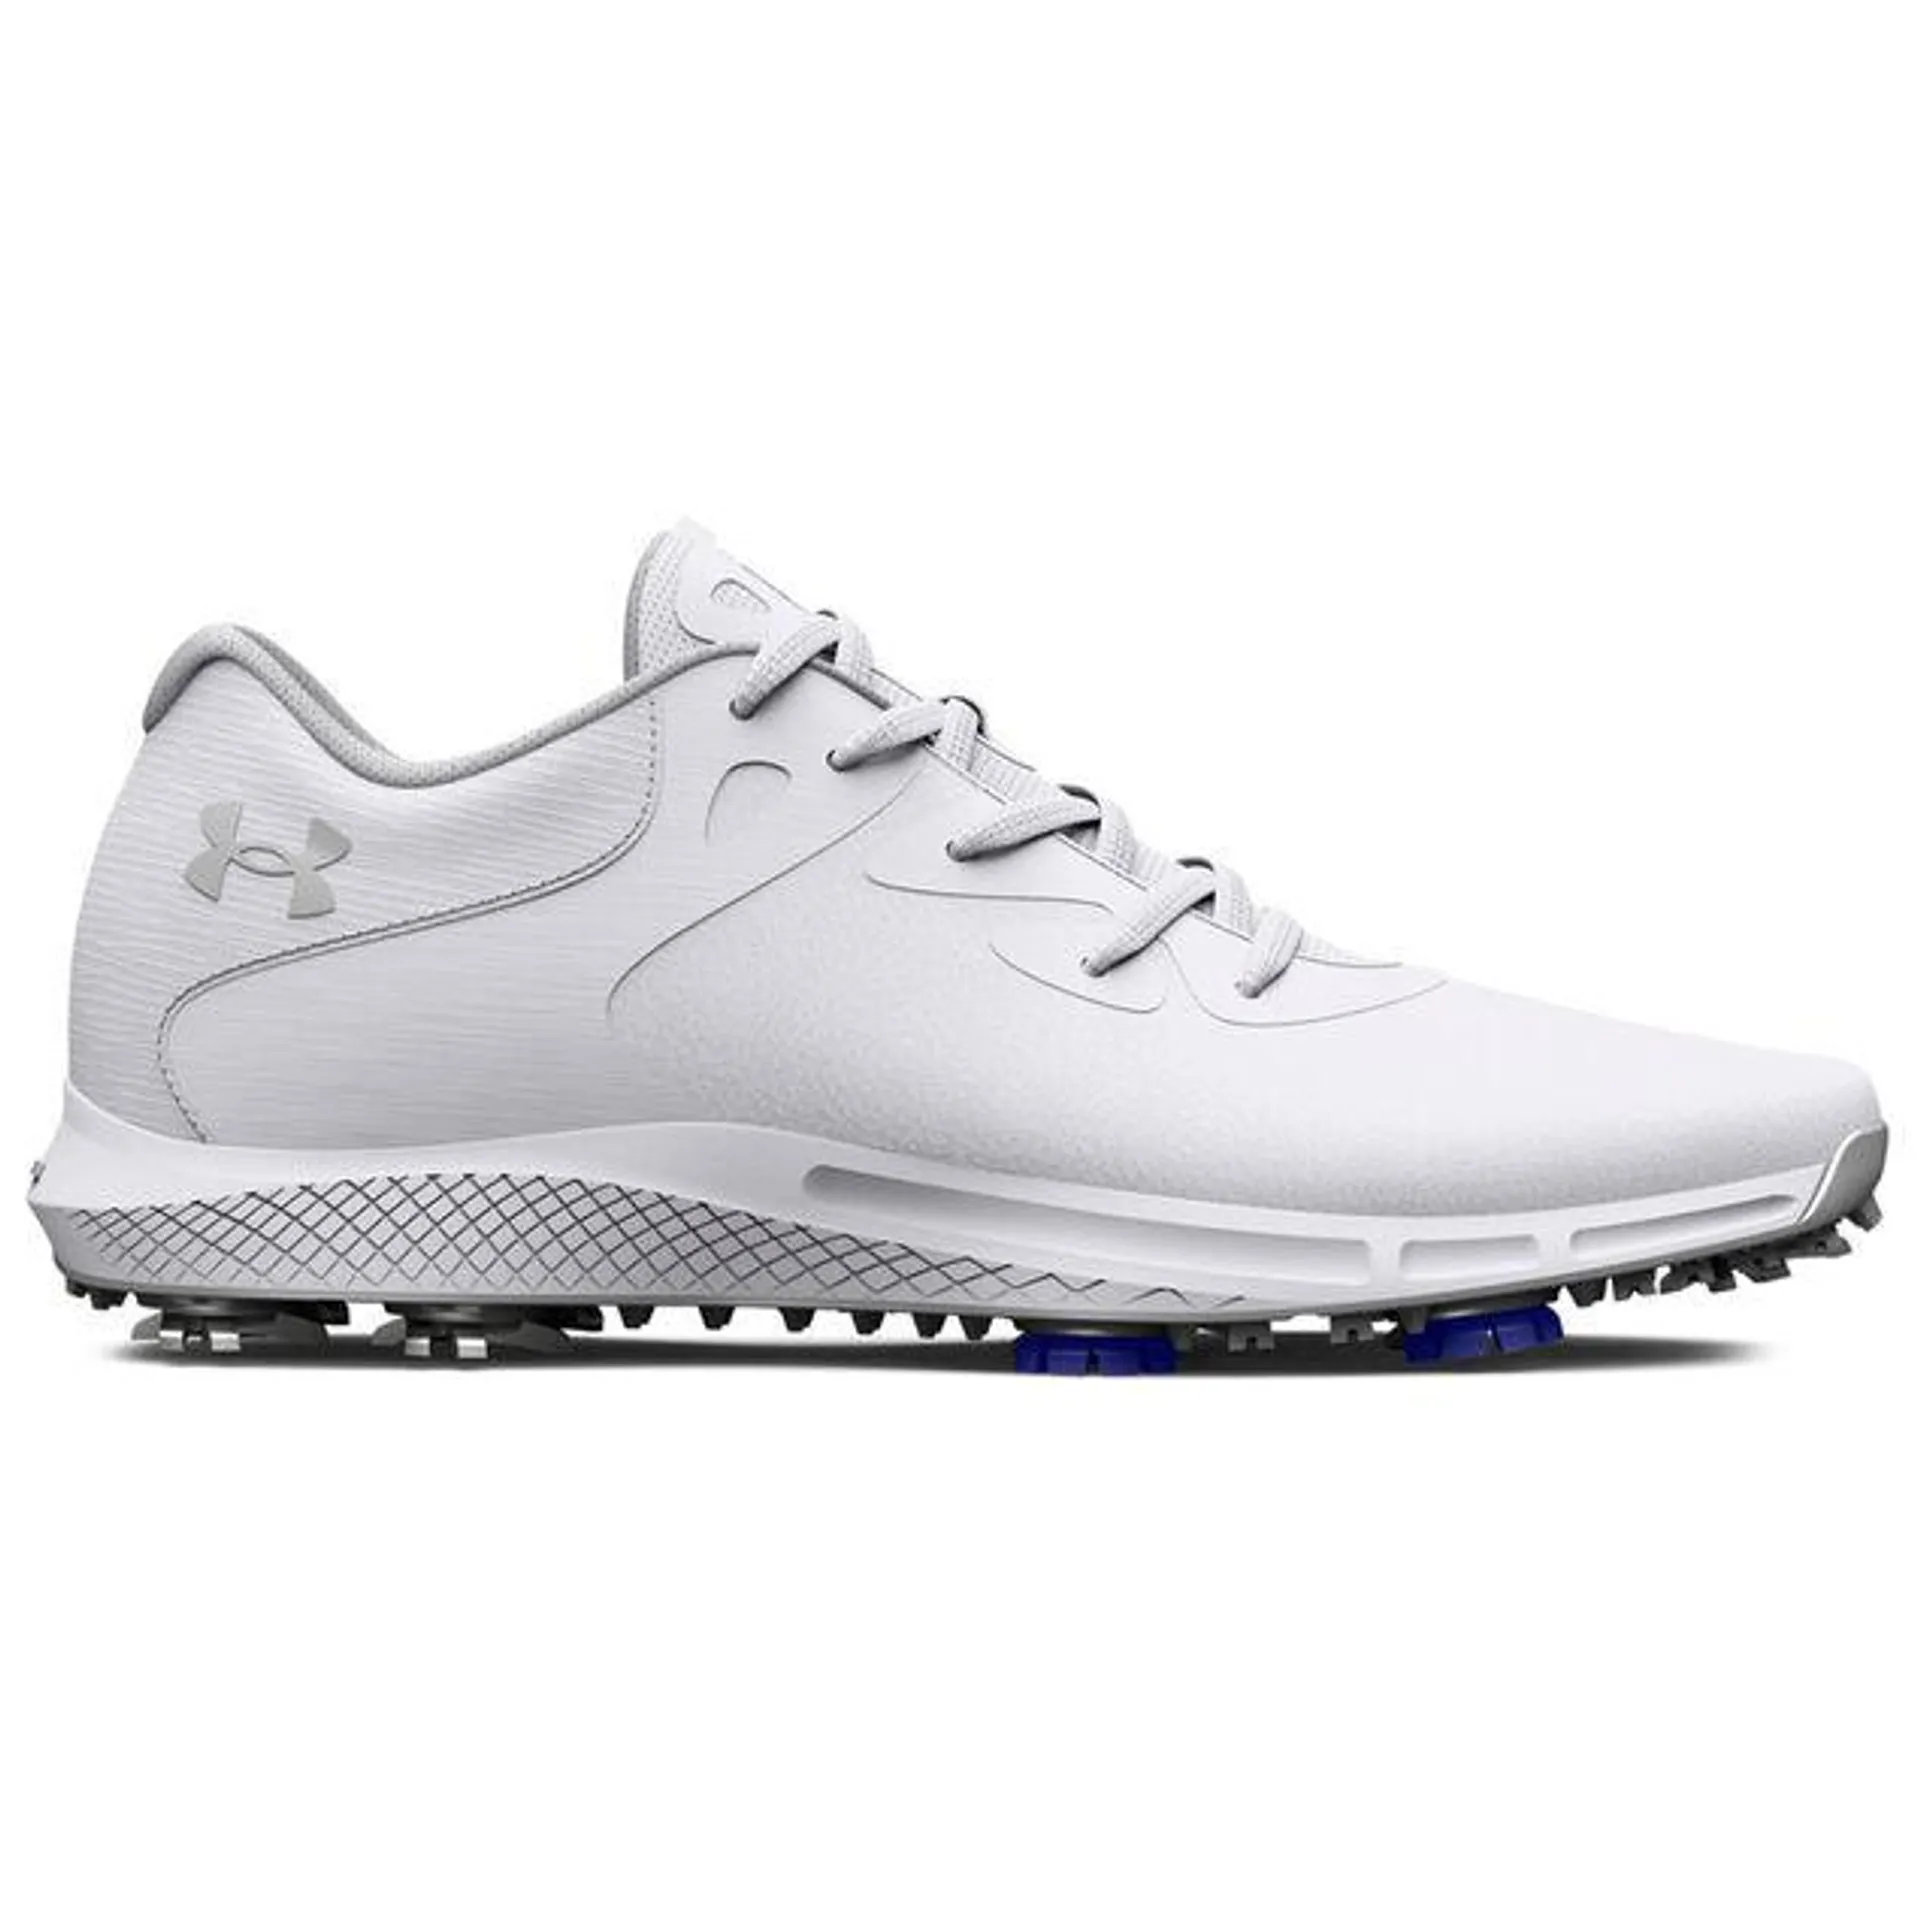 Under Armour Ladies Charged Breathe 2 Waterproof Spiked Golf Shoes